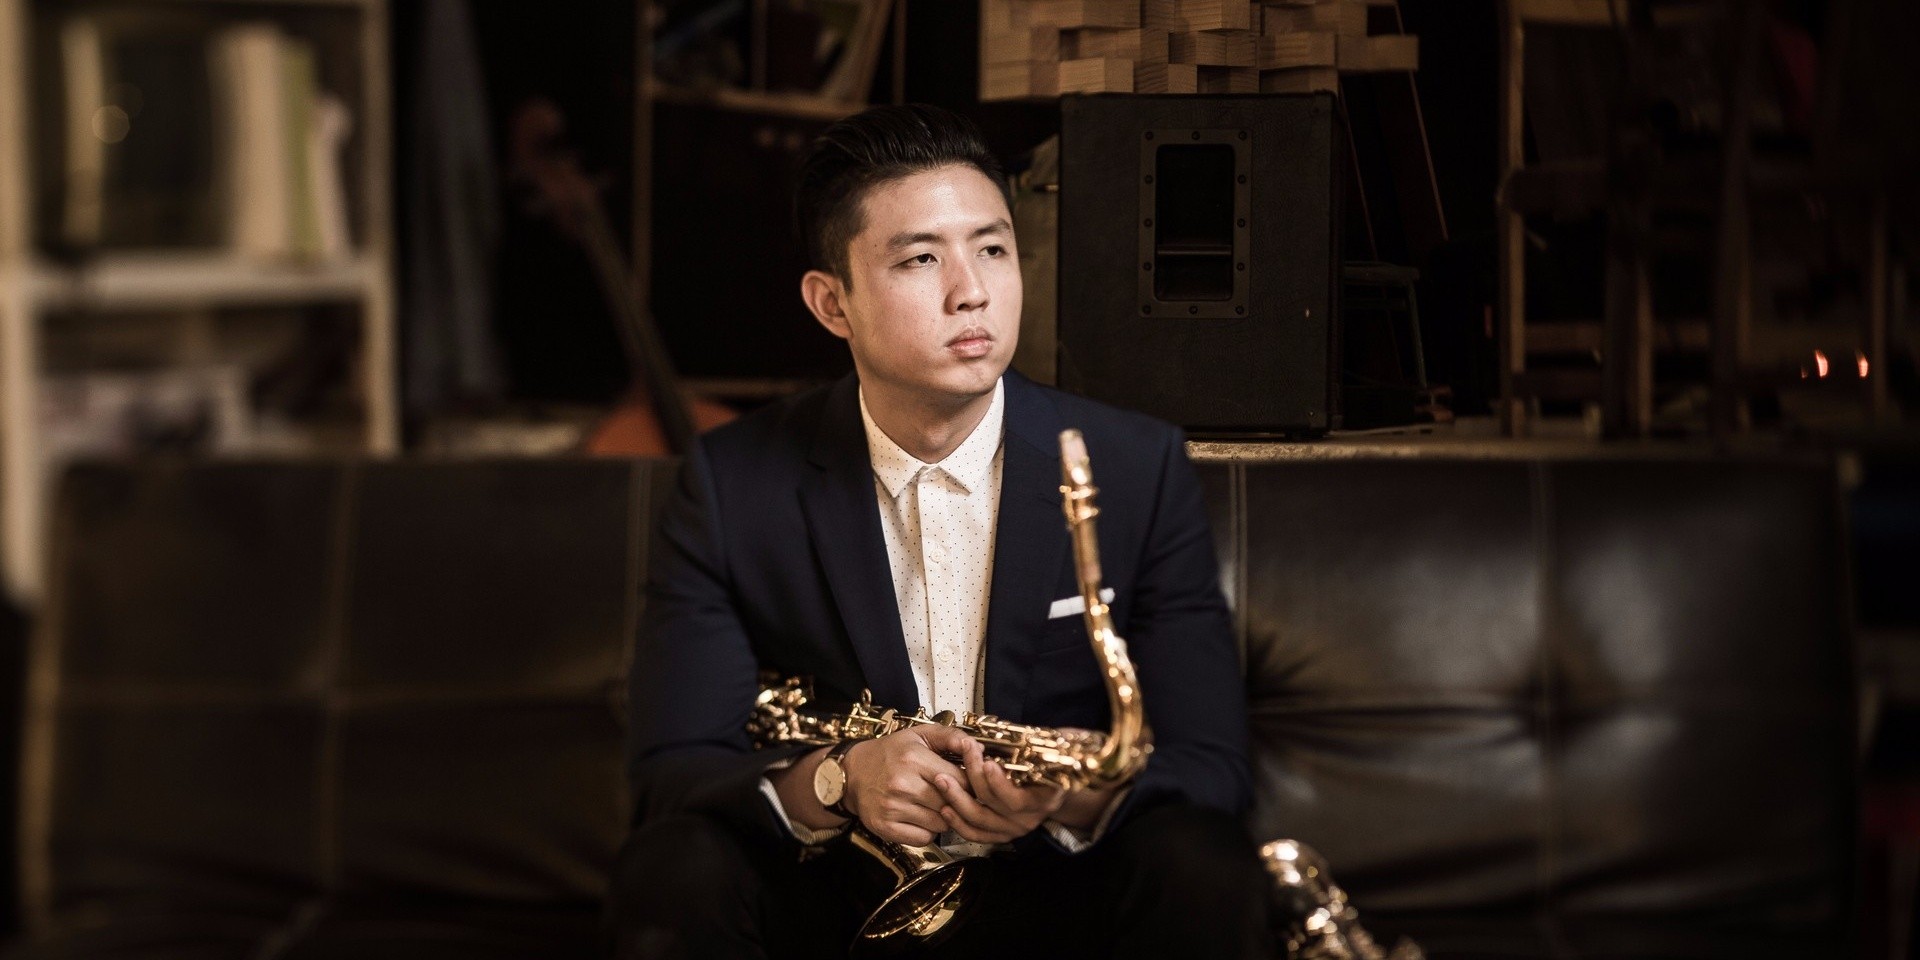 Singaporean saxophonist Daniel Chia to perform with Larry Carlton and Paul Brown in the US